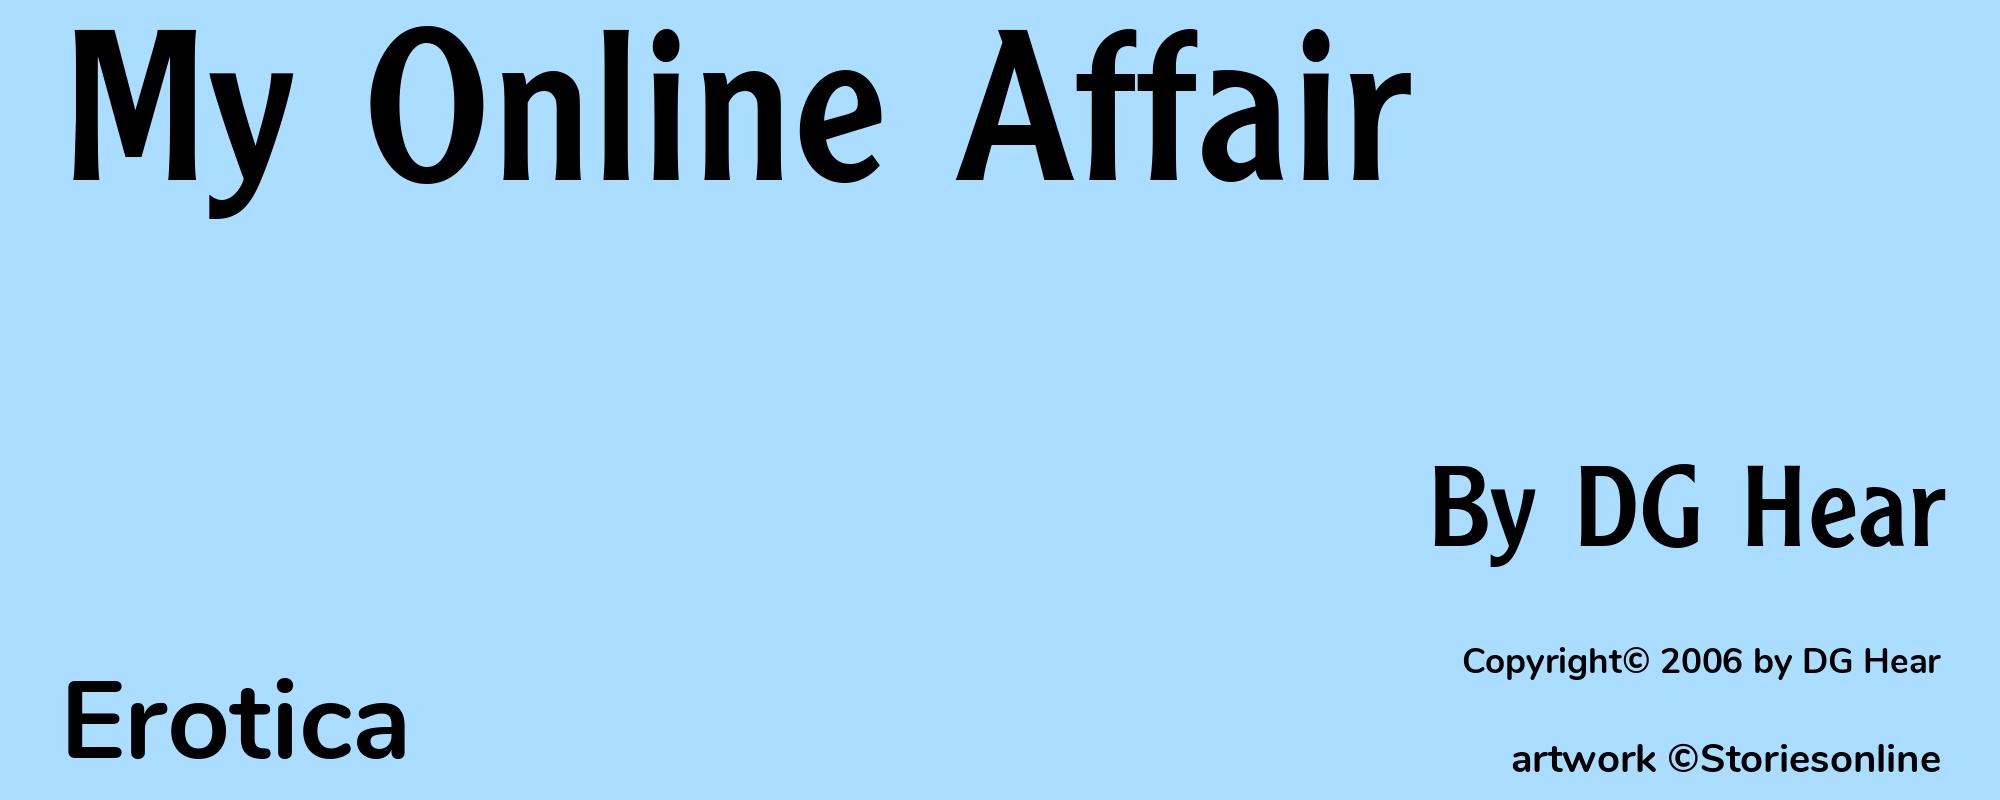 My Online Affair - Cover